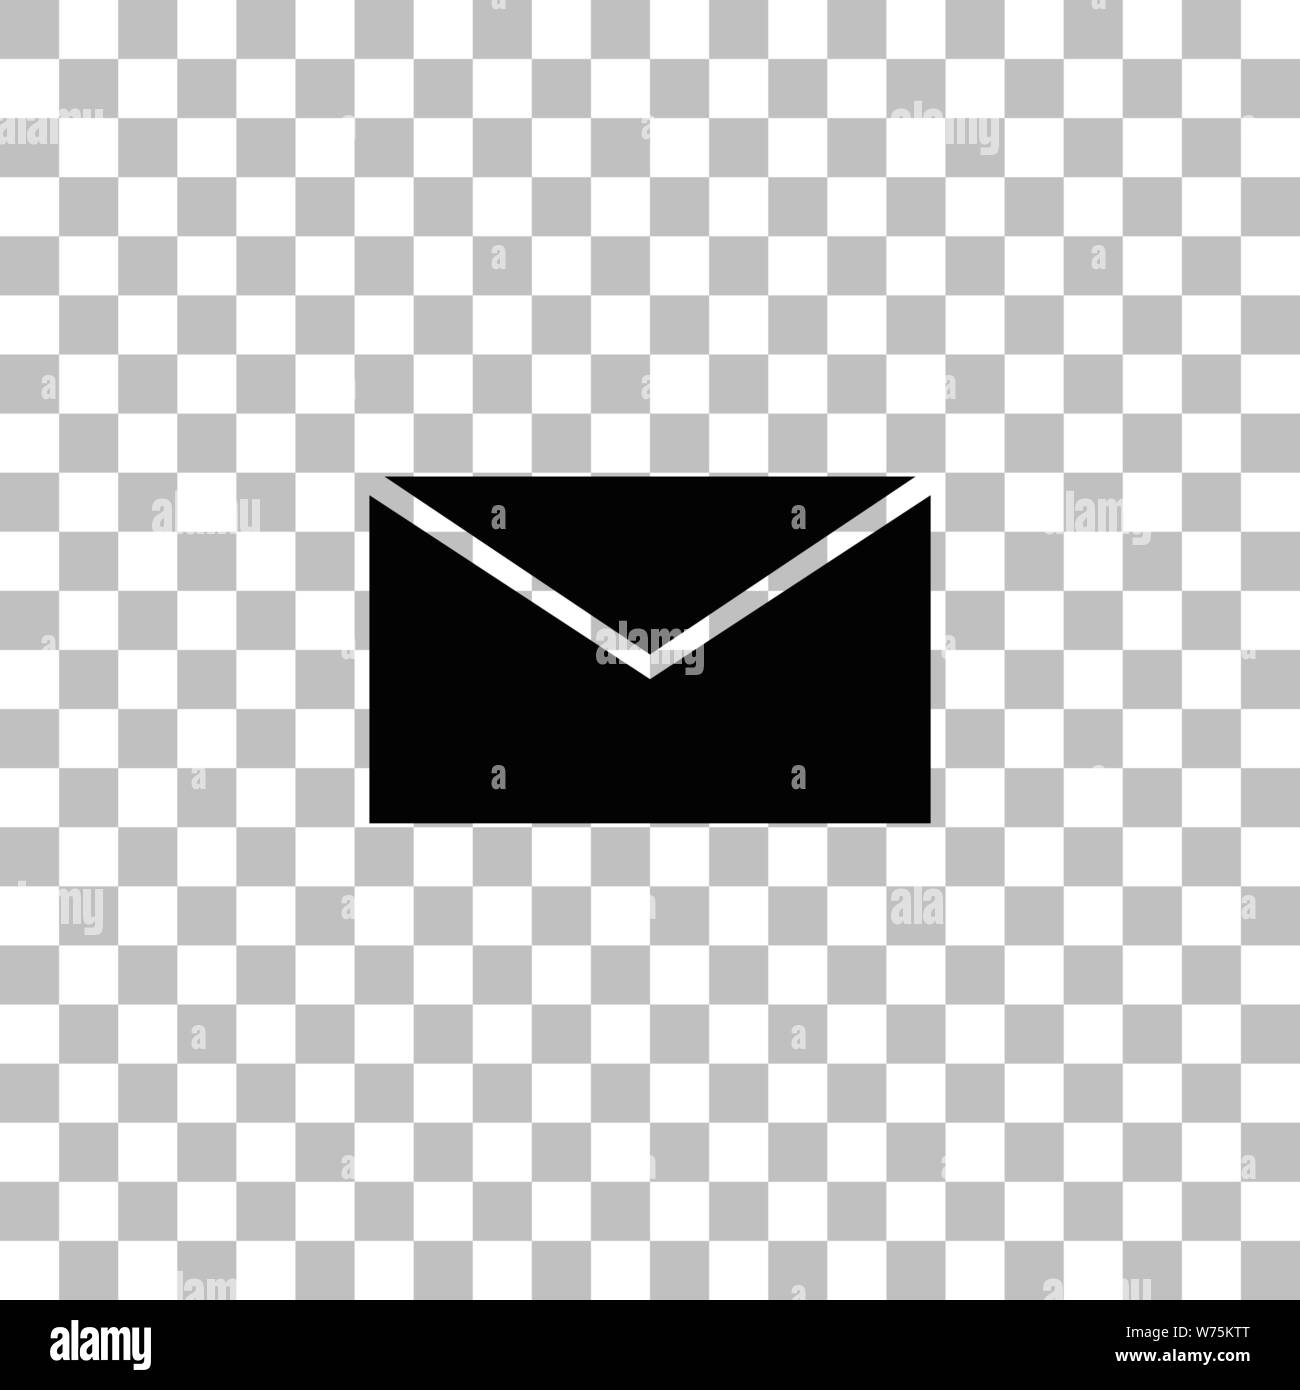 E Mail. Black flat icon on a transparent background. Pictogram for your project Stock Vector